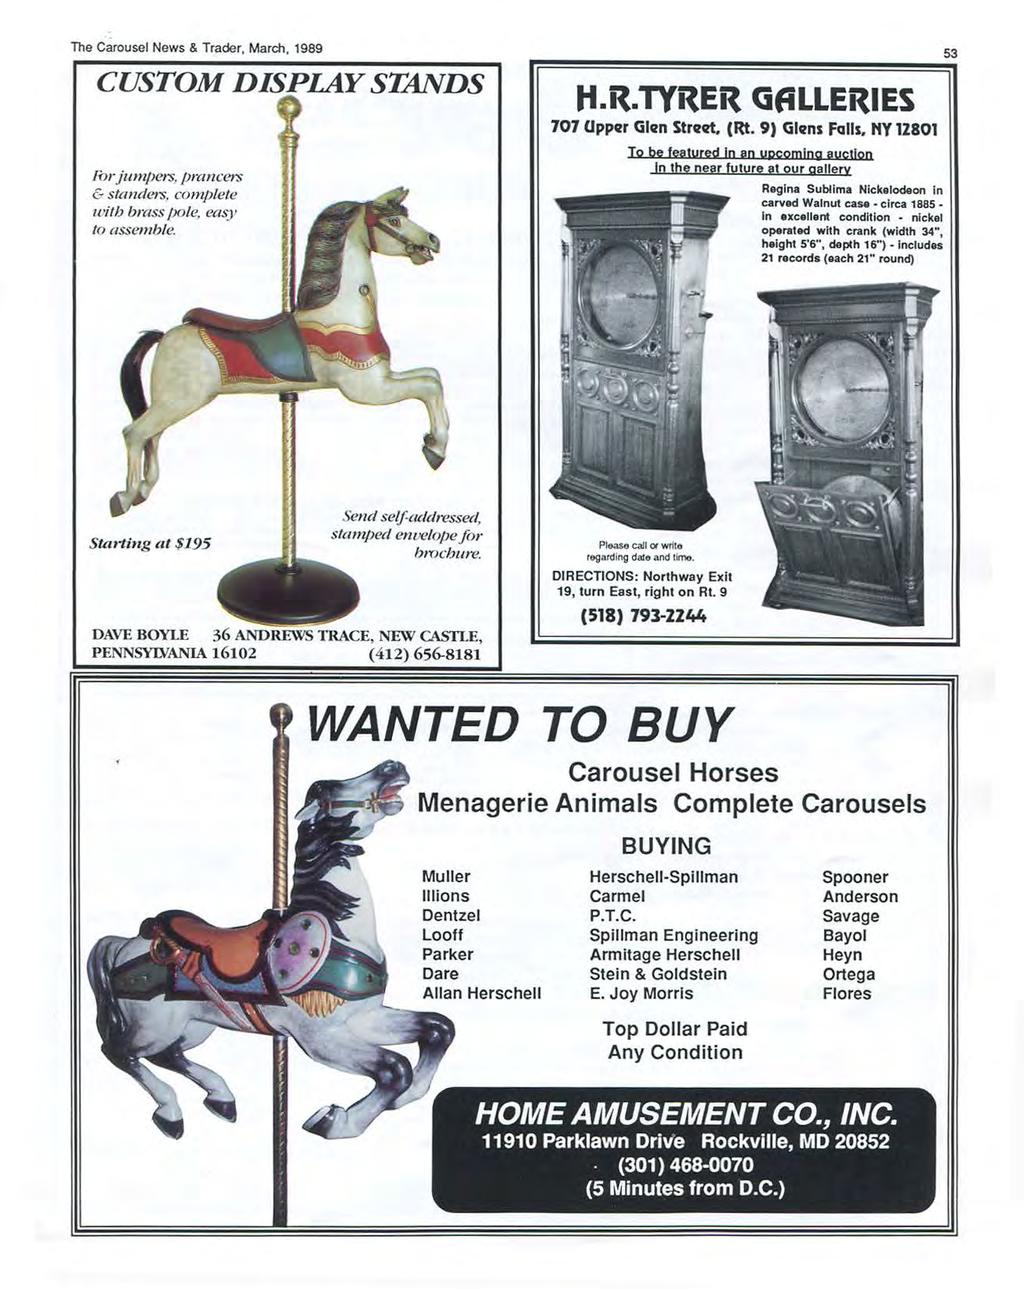 The Carousel News & Trader, March, 1989 CUSTOM DISPLAY STANDS Forjumpers, prancers & standers. complete witb brass pole, easy to assemble. H.~.TY~Eit GALLERIES 707 Oppvr Glvn Strut. (Rt.